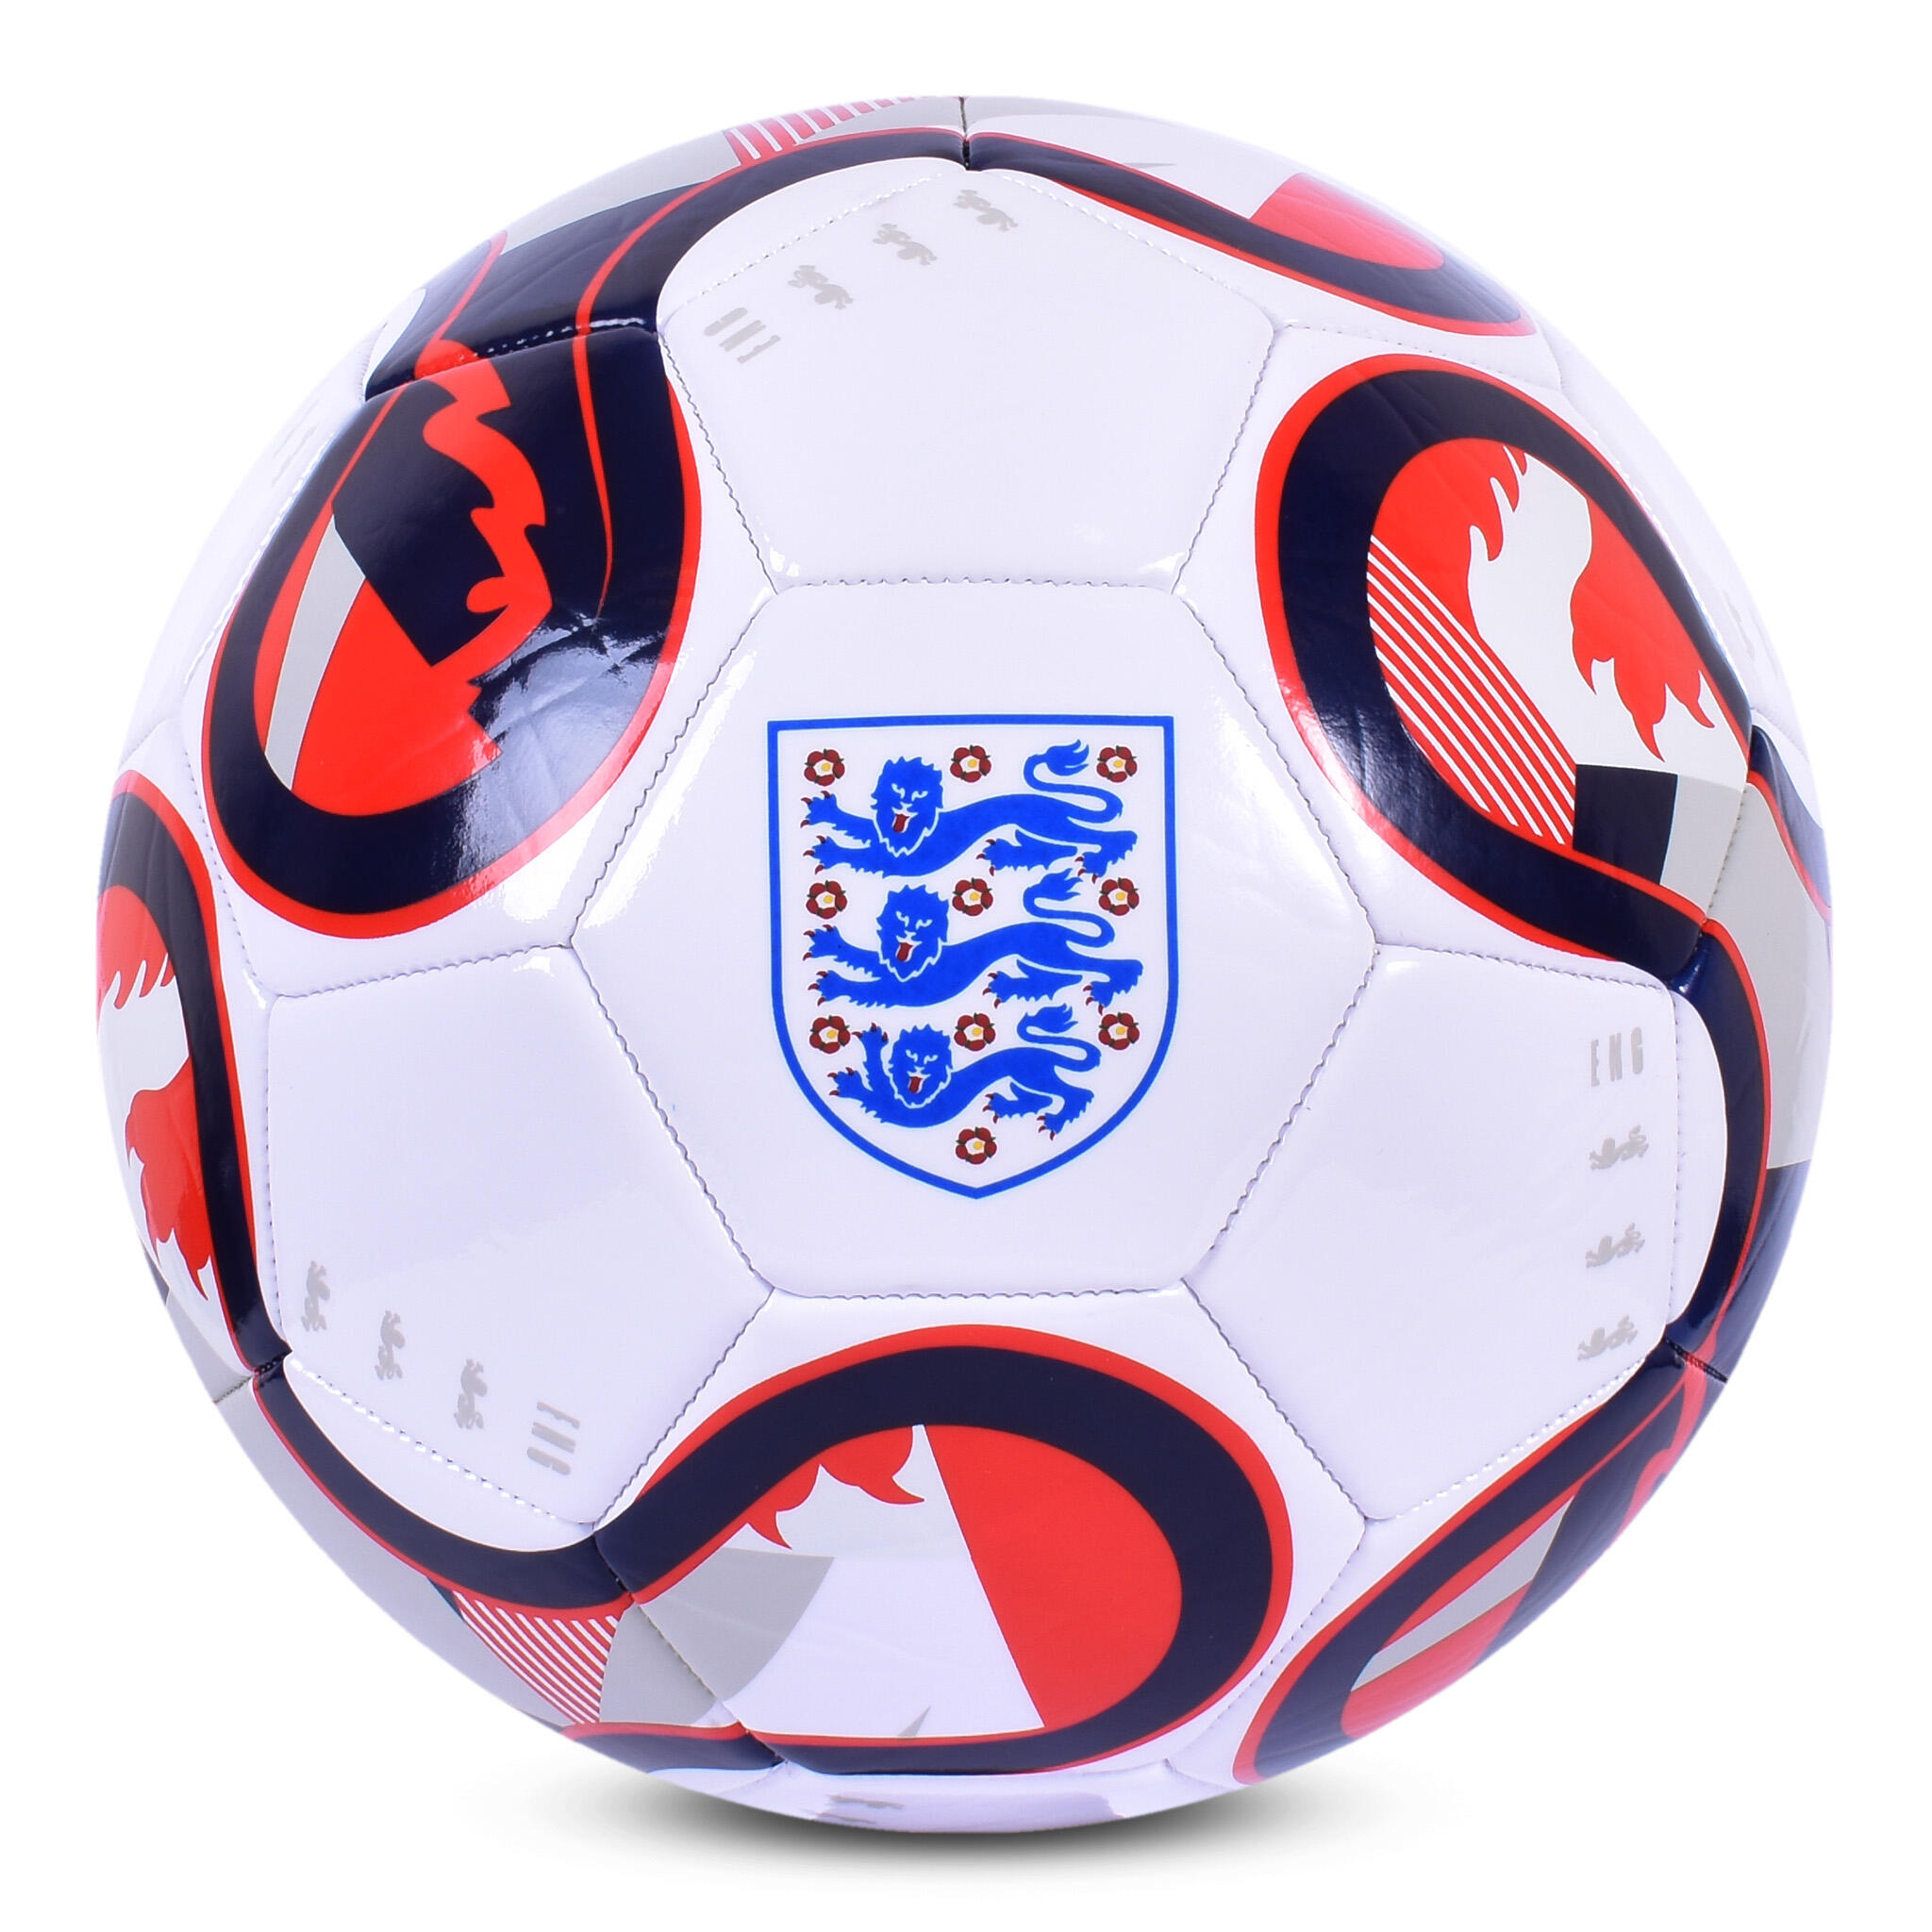 HY-PRO England Supporter Football Size 5 White Red Blue